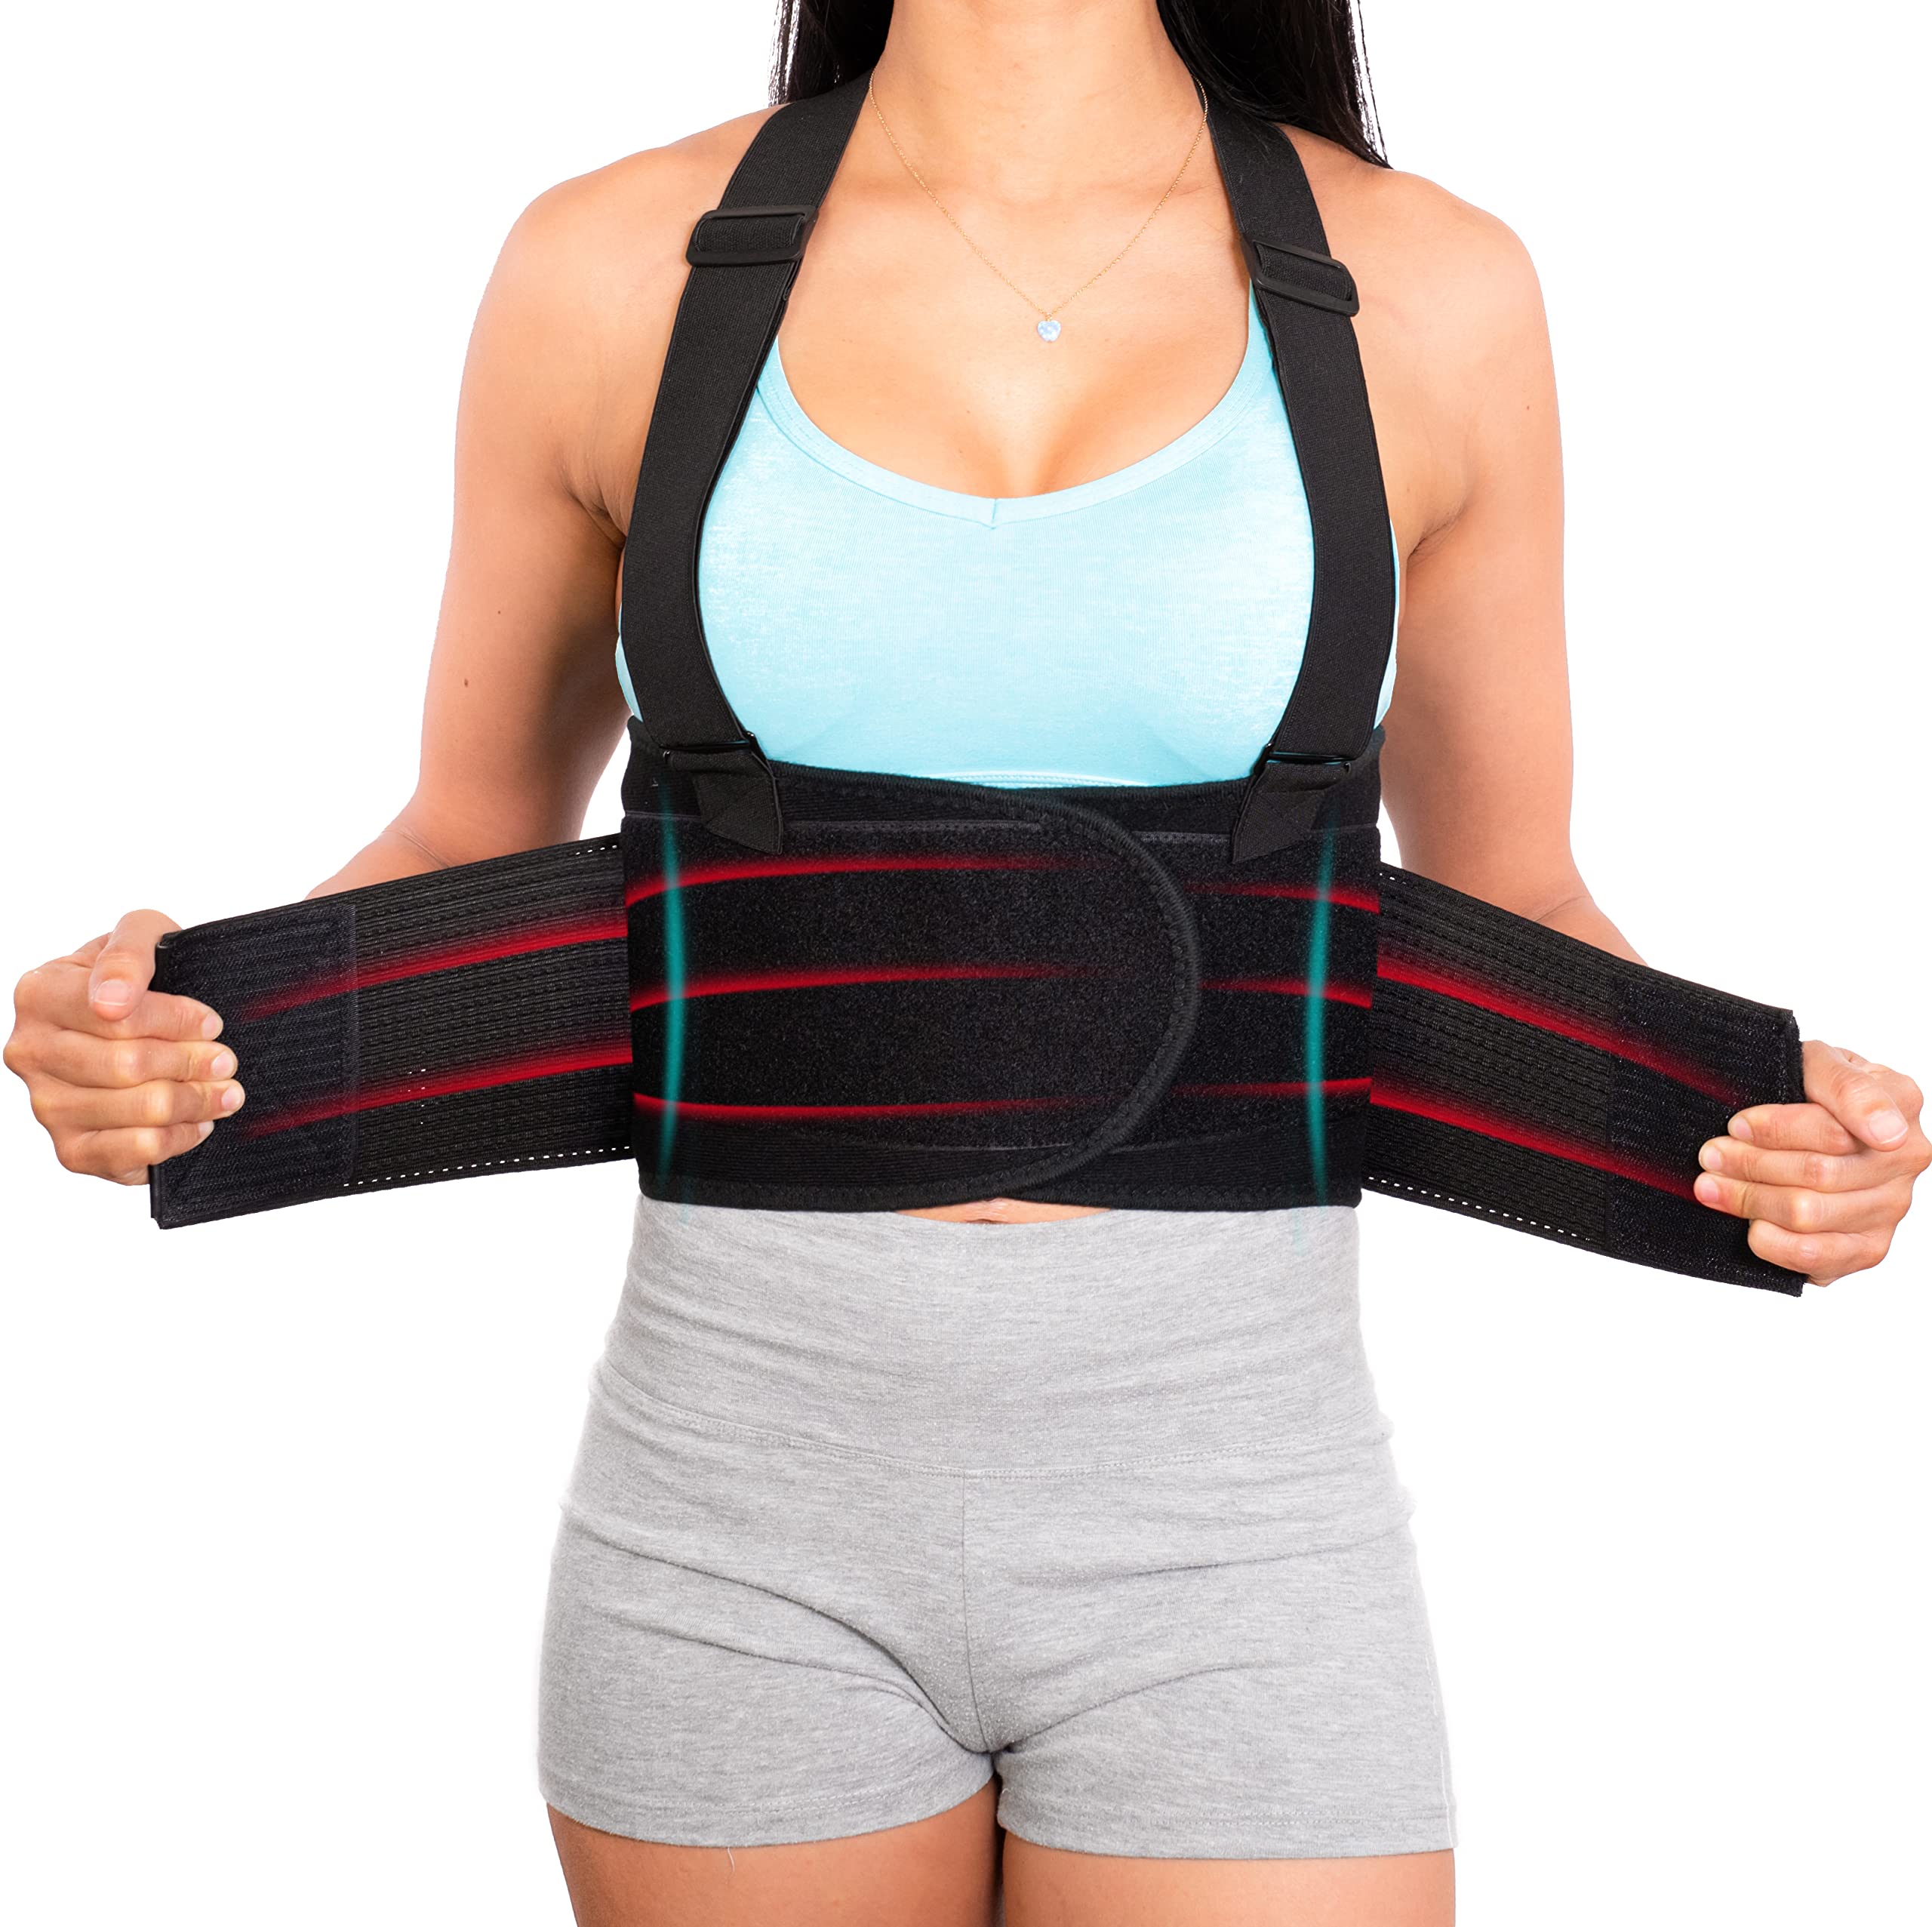 Lower Back Brace |Plus Size| up to 60 inch | Posture Recovery, Workout,  Herniated Disc Pain Relief | Waist Trimmer Weight Loss Ab Belt | Exercise